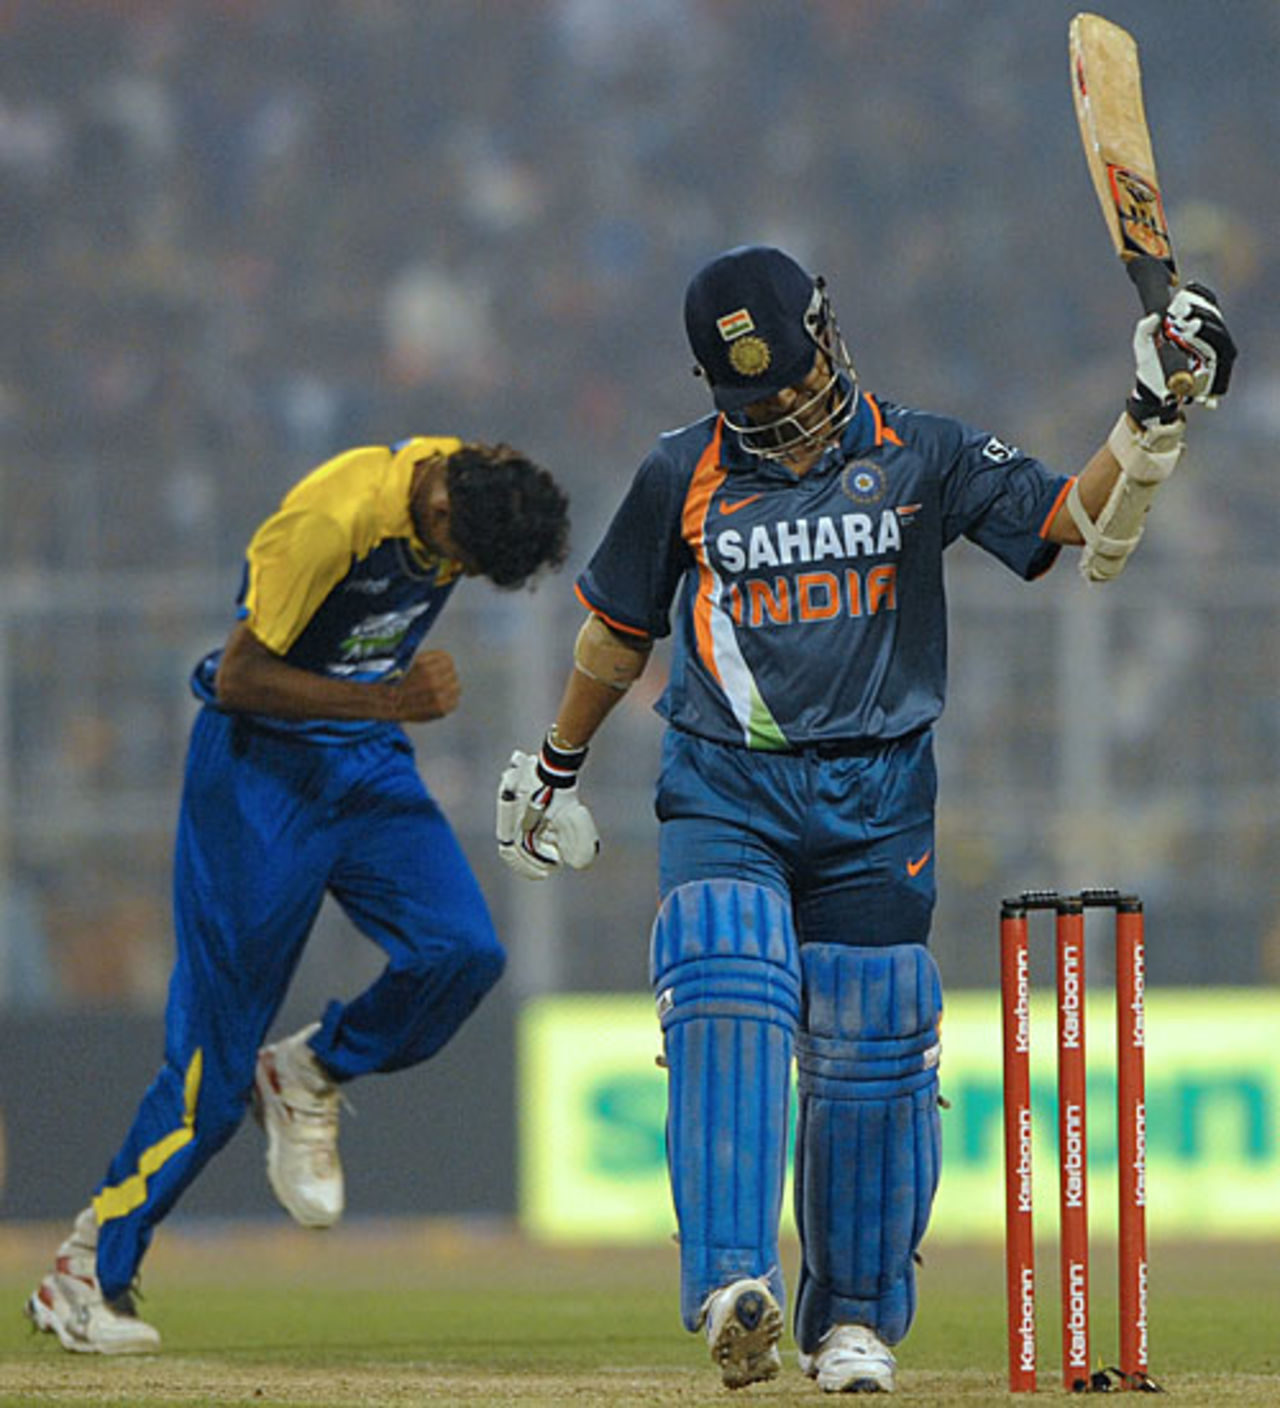 Sachin Tendulkar is disappointed after holing out to cover-point, India v Sri Lanka, 4th ODI, Kolkata, December 24, 2009